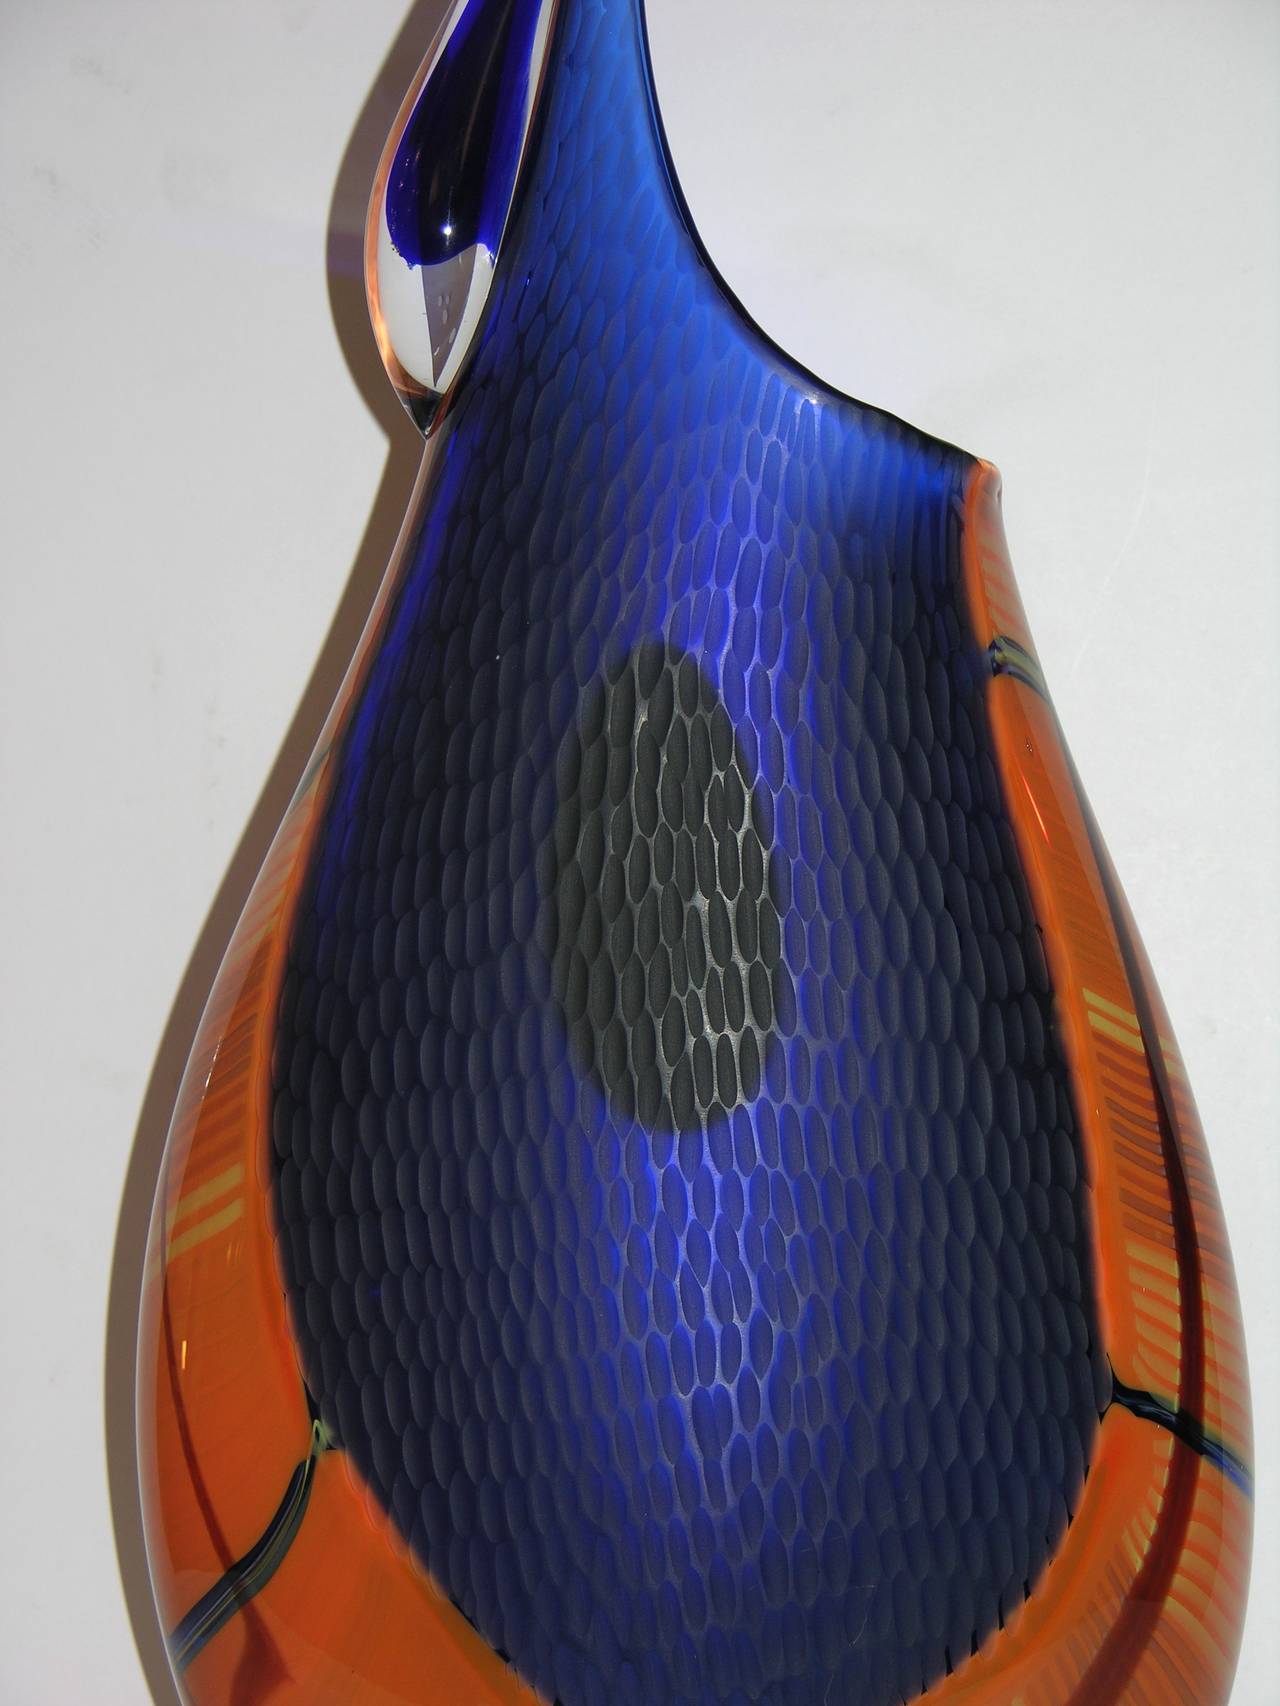 Contemporary Exceptional Mouth Blown Murano Glass Vase by Davide Dona'